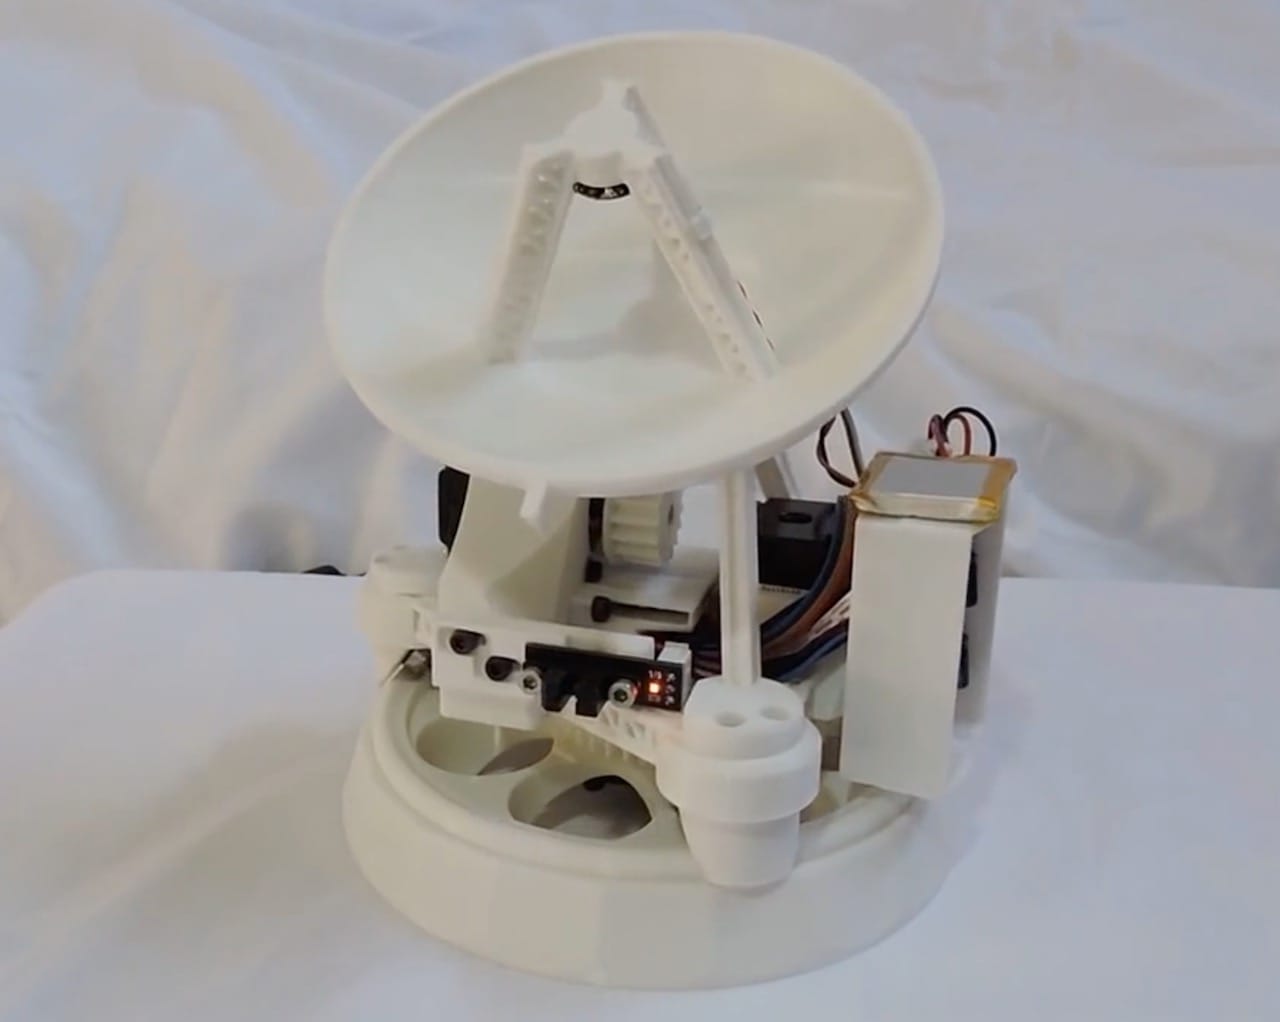  The 3D printed - and functional - satellite dish 